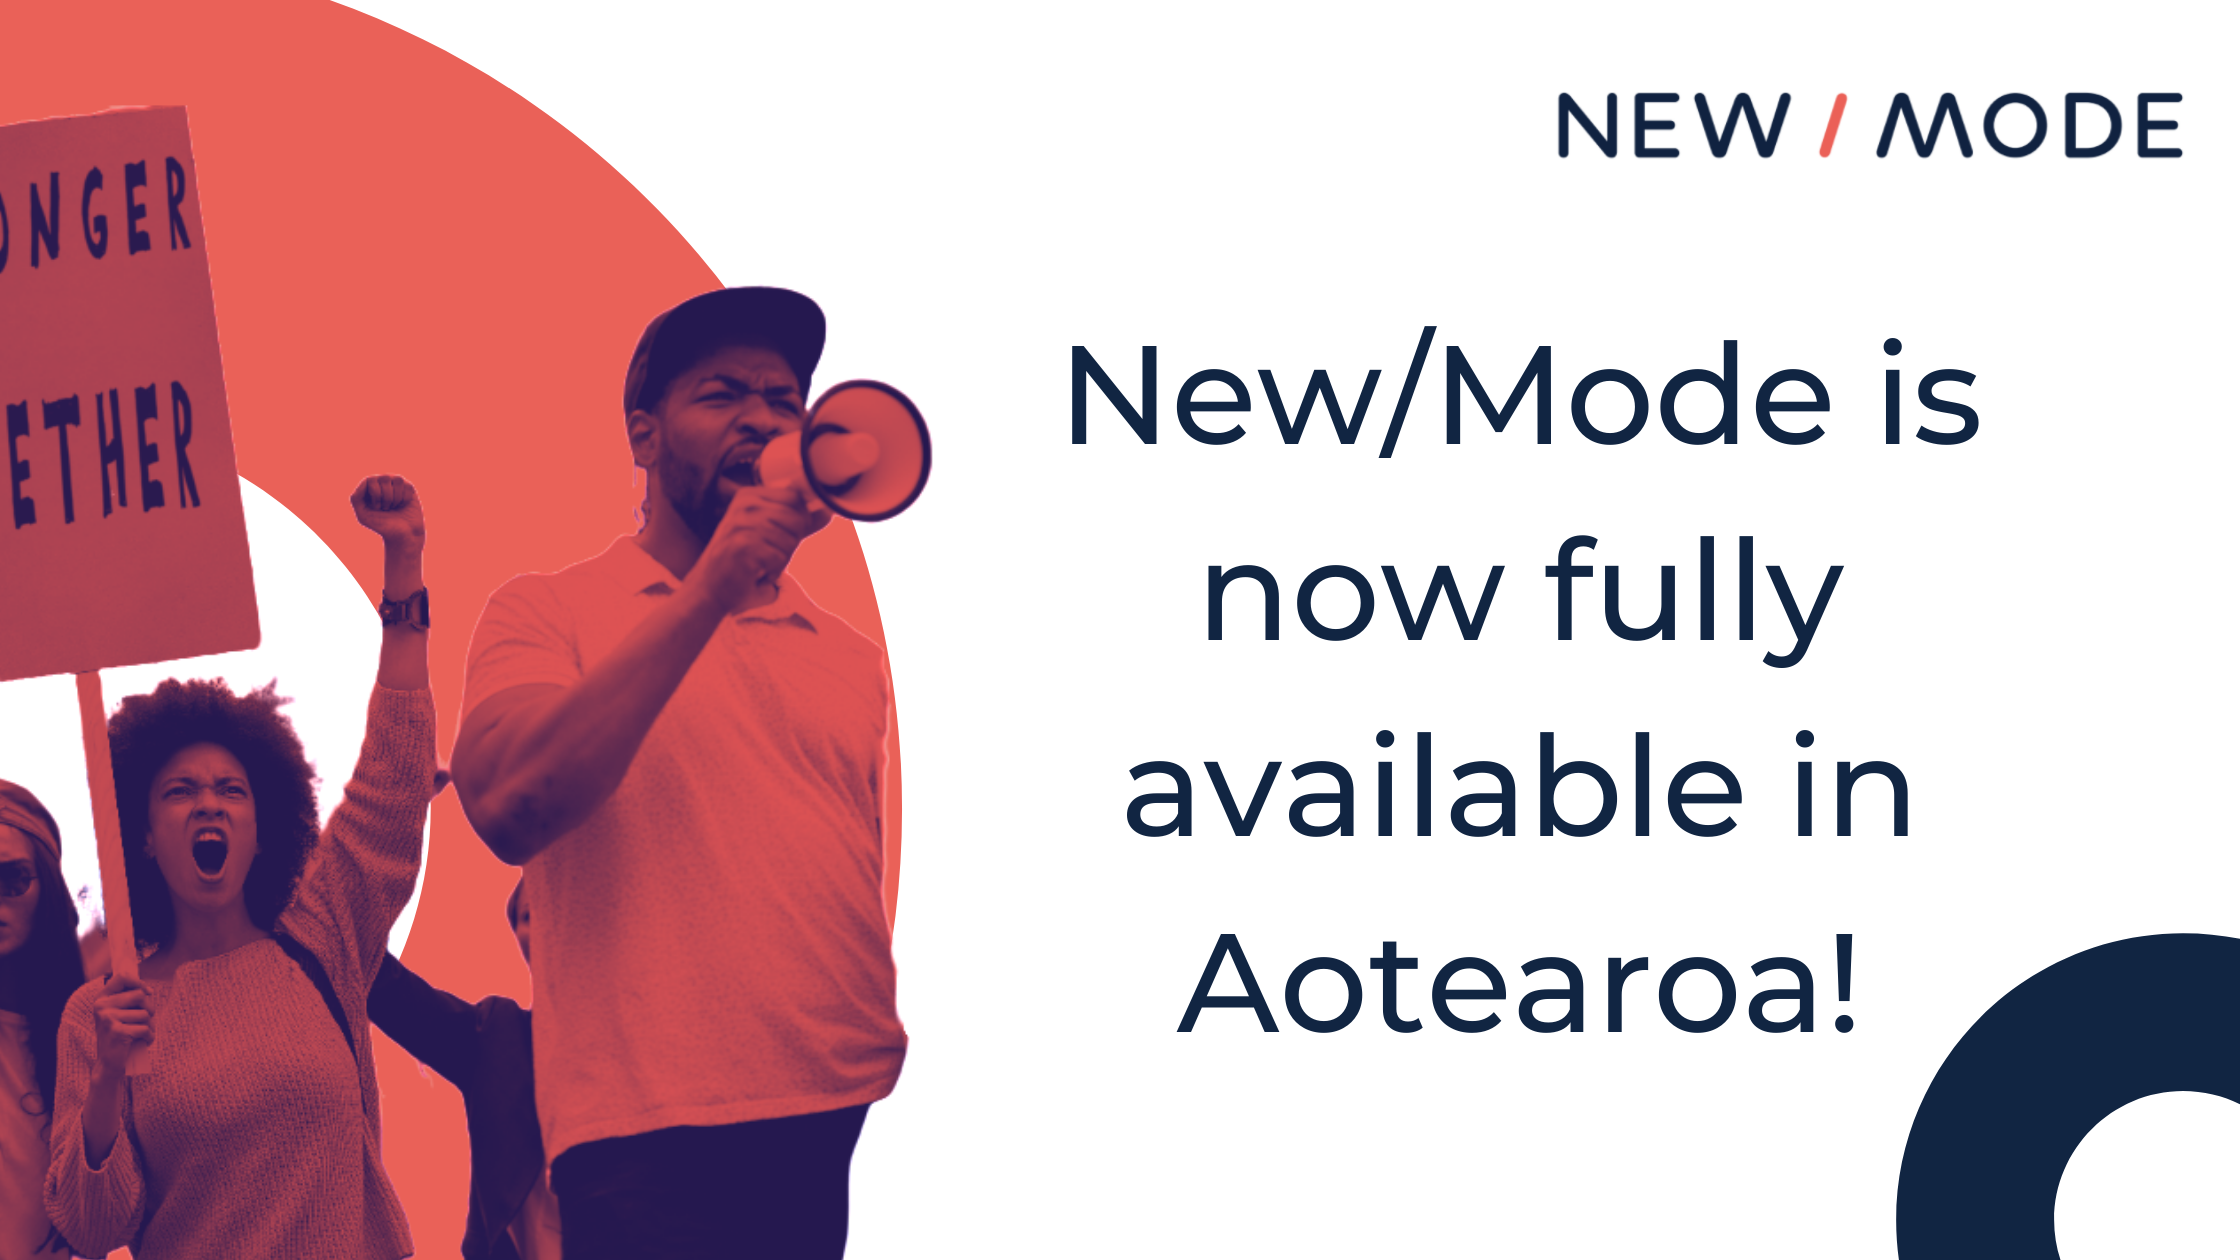 NewMode is now available in Aotearoa!